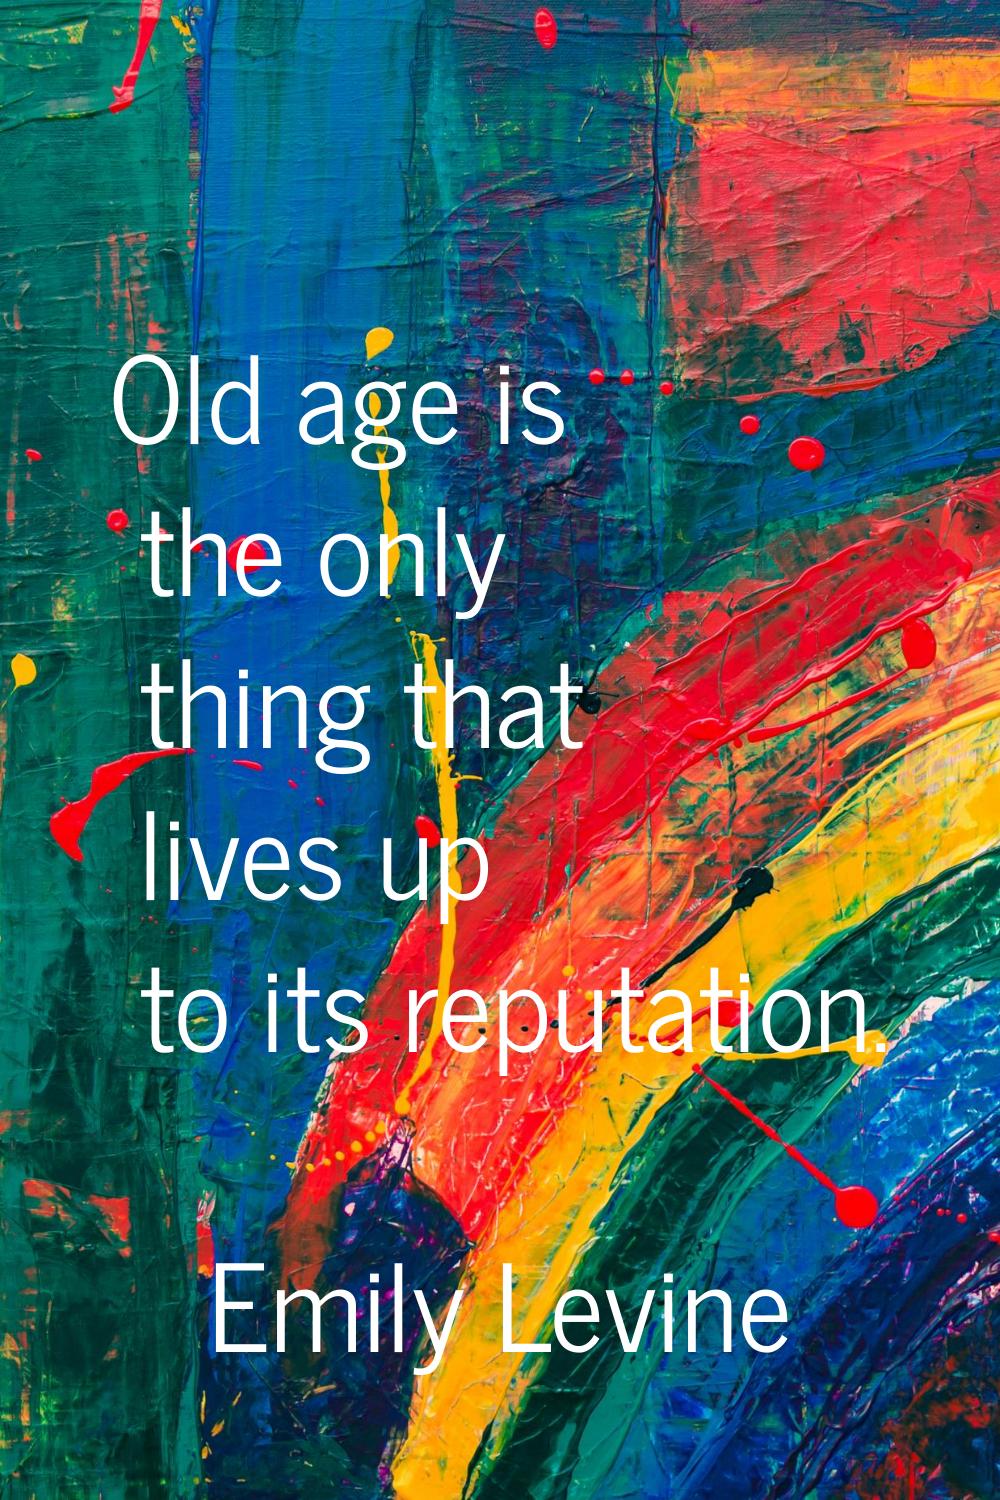 Old age is the only thing that lives up to its reputation.